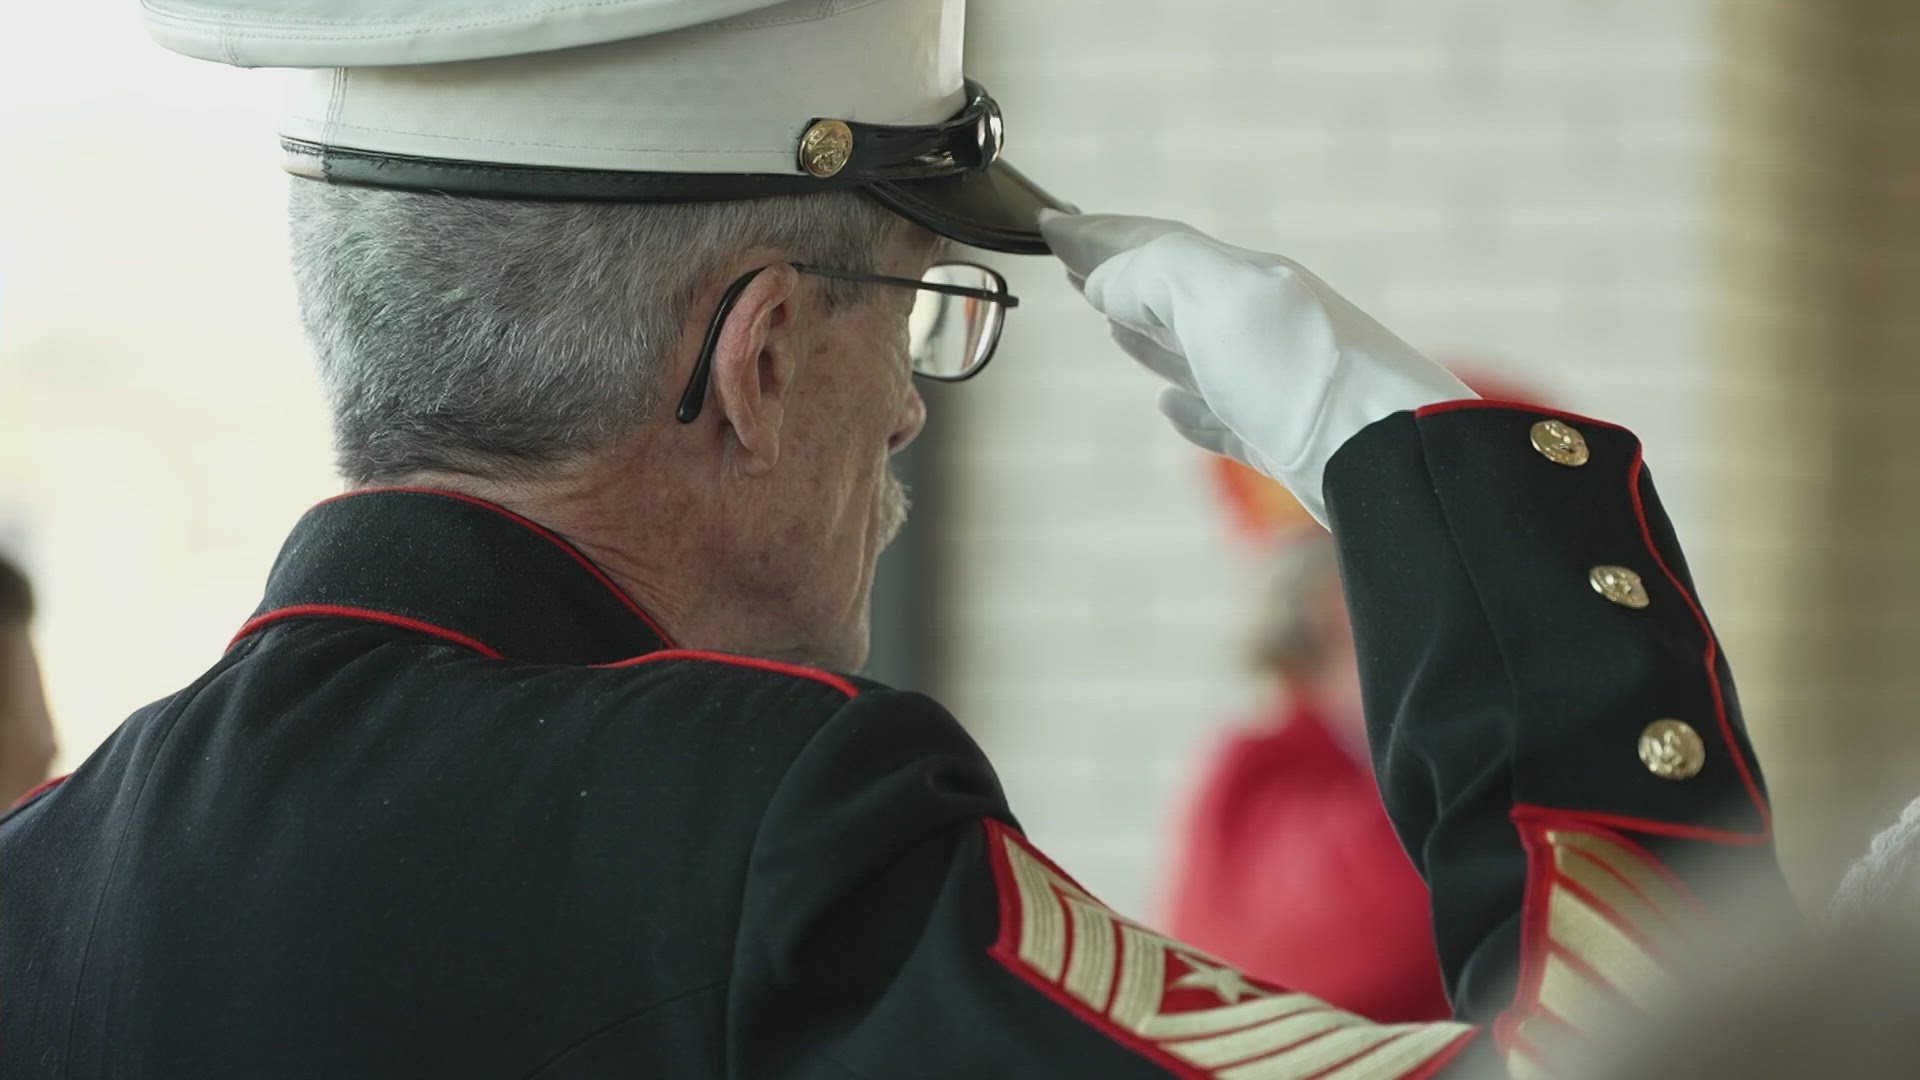 "Semper fidelis" is the motto of the U.S. Marines. It means "always faithful."